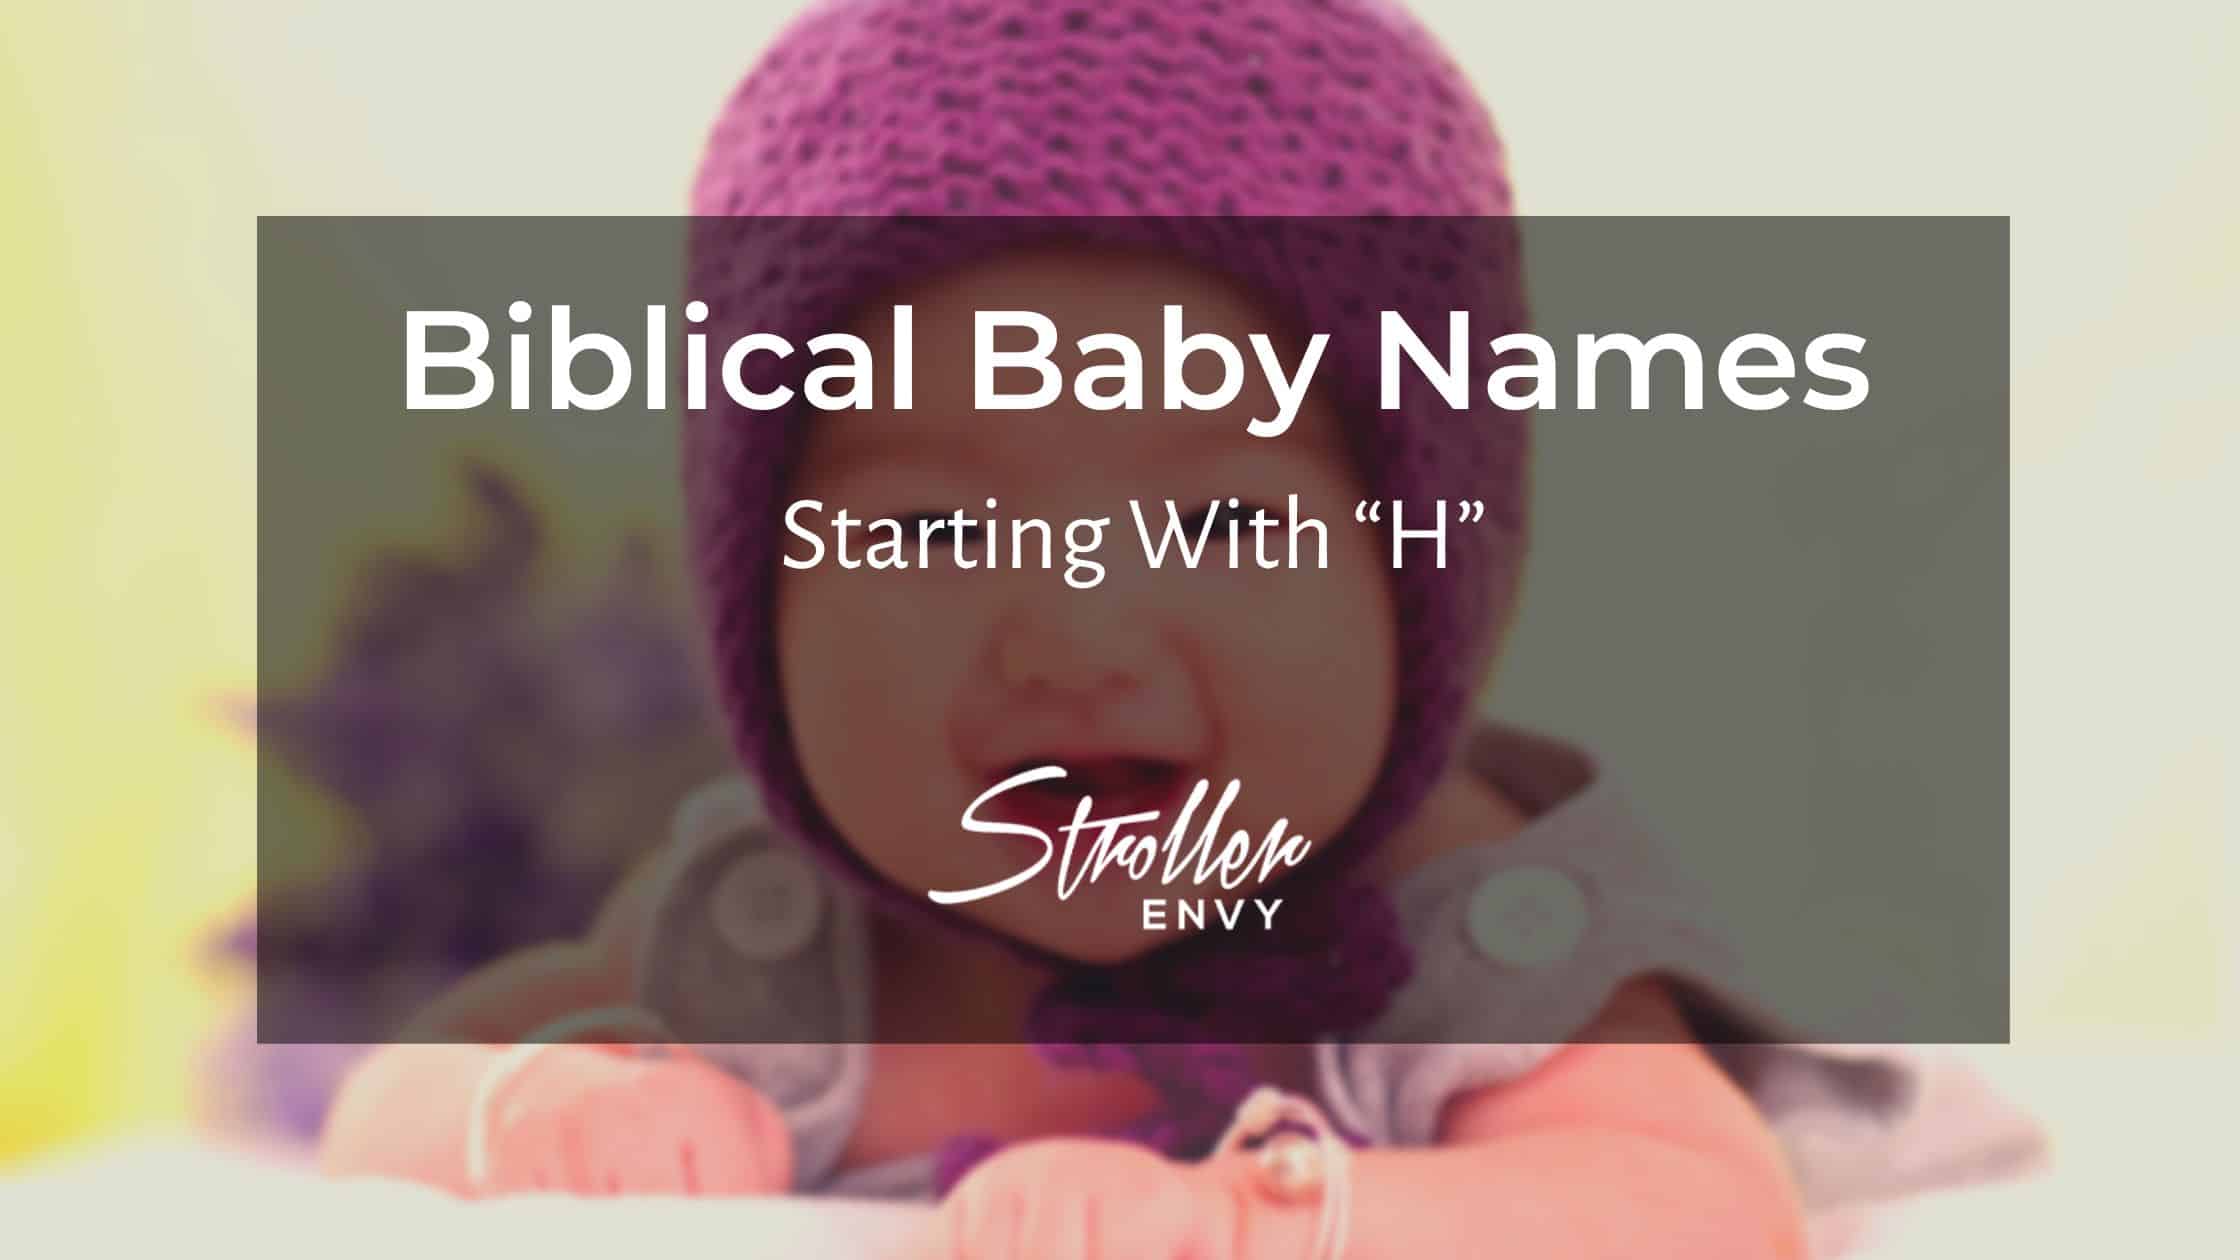 50 biblical baby names beginning with H